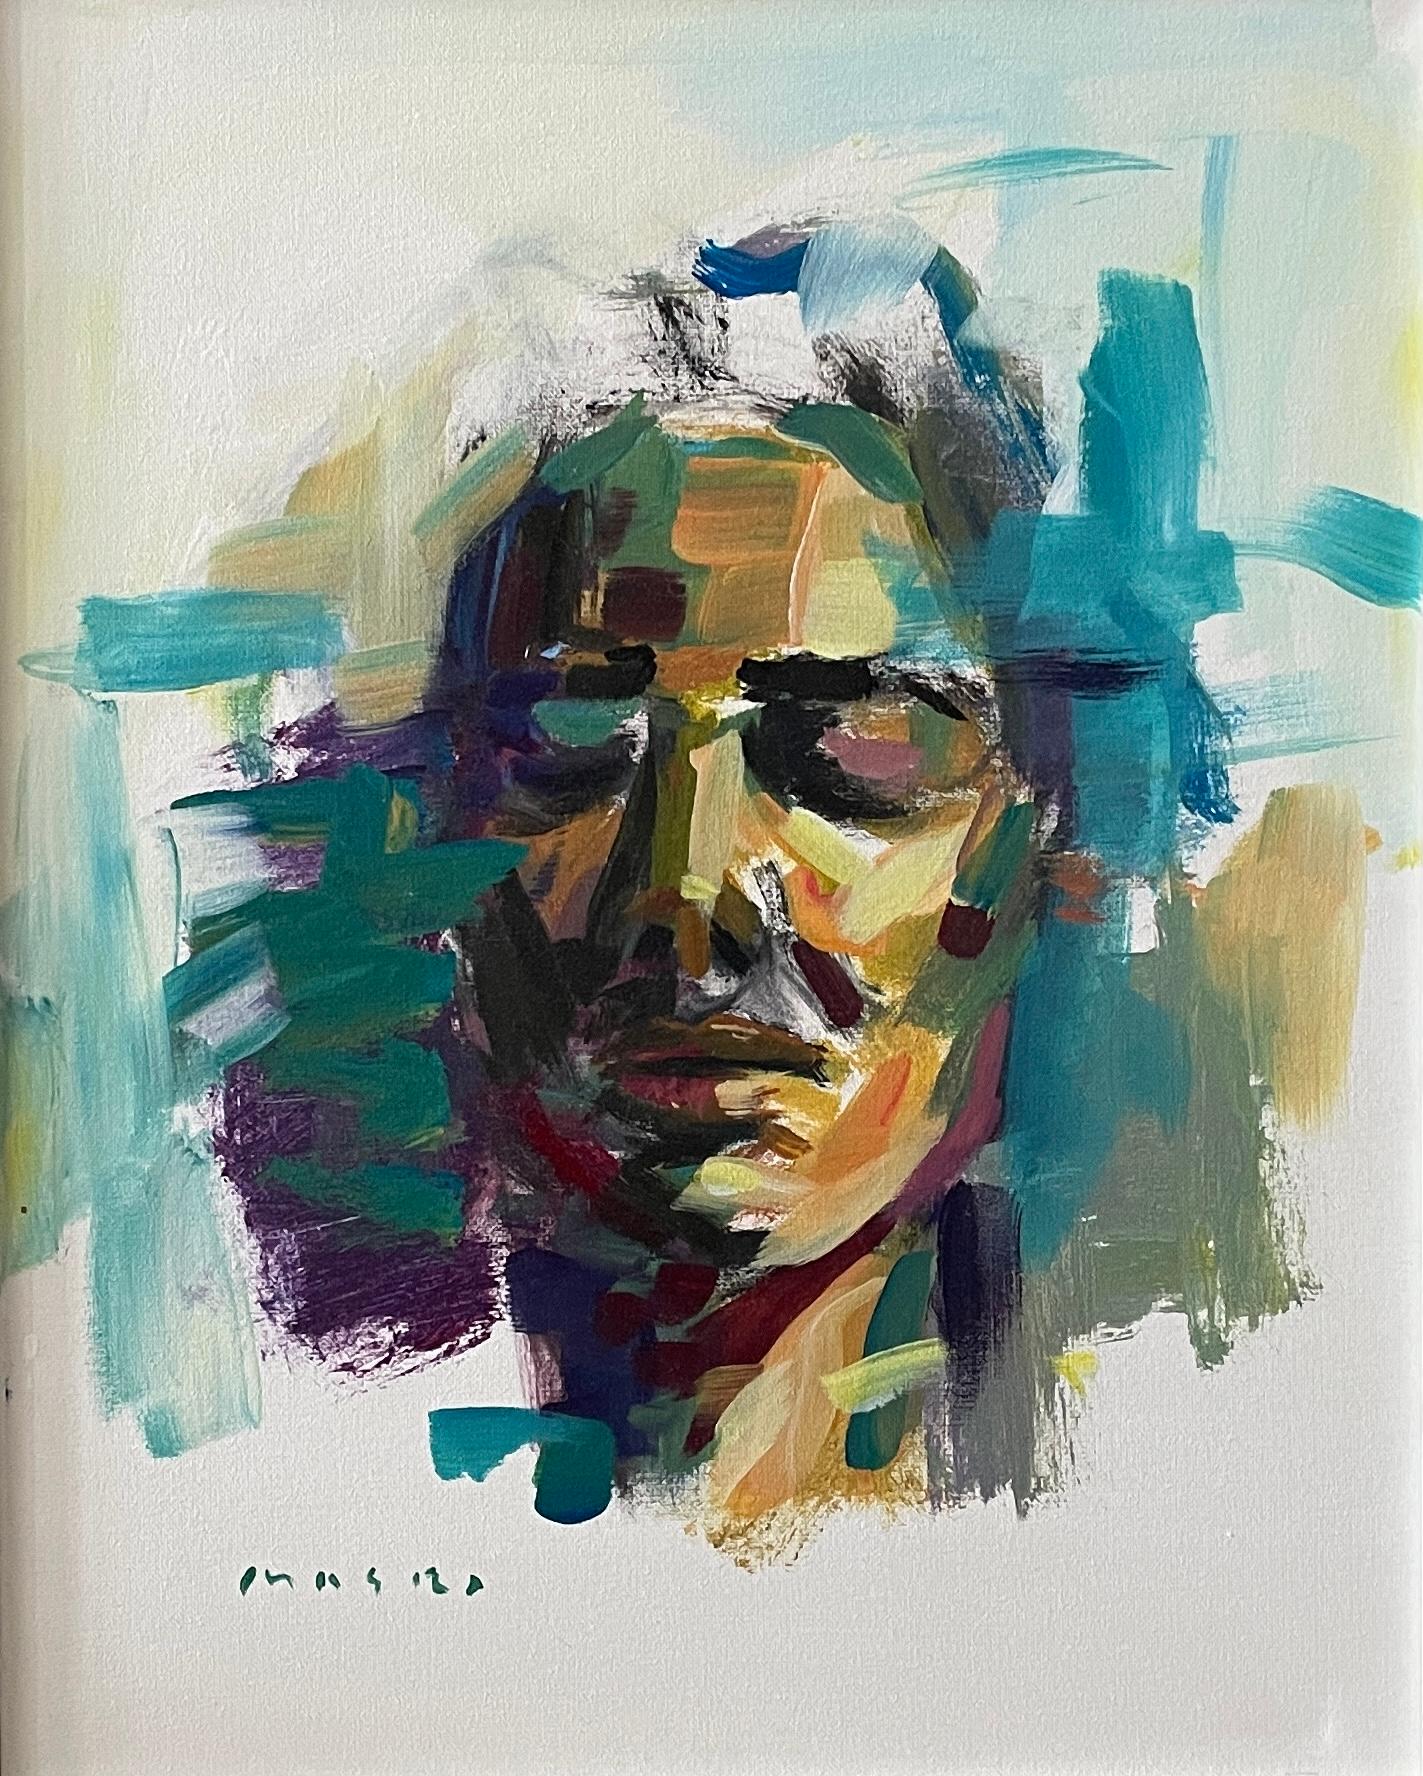 Masri Hayssam Portrait Painting - "Essence" Contemporary Abstract Expressionist Female Portrait by Masri